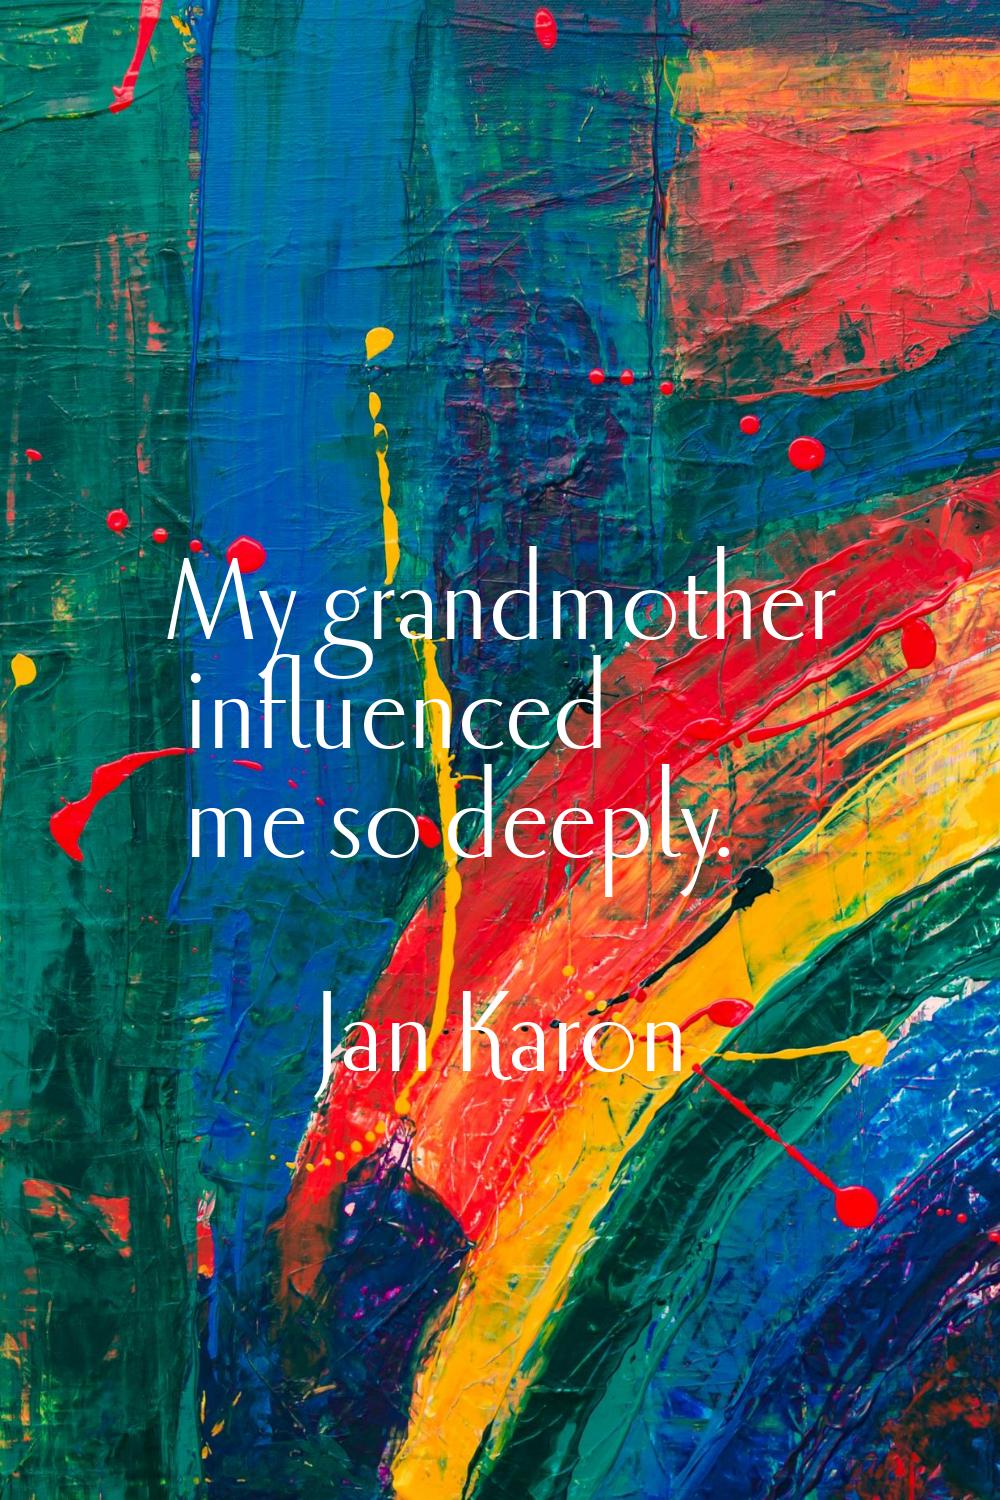 My grandmother influenced me so deeply.